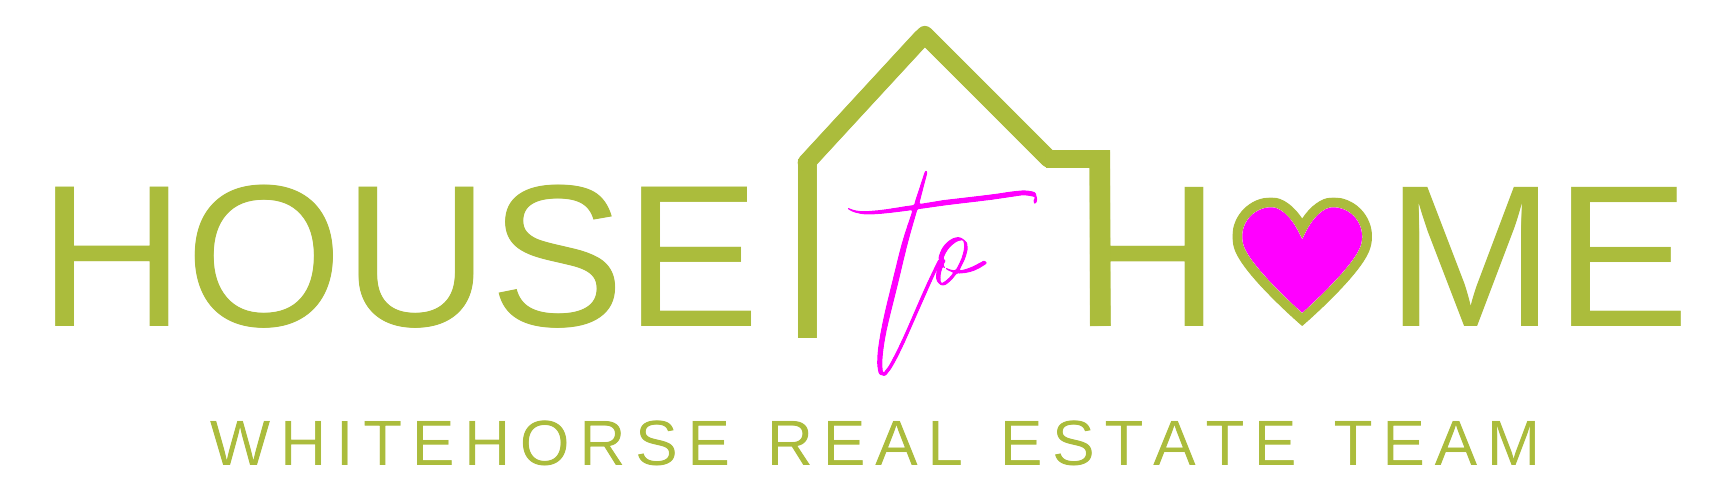 Whitehorse House to Home Real Estate Team